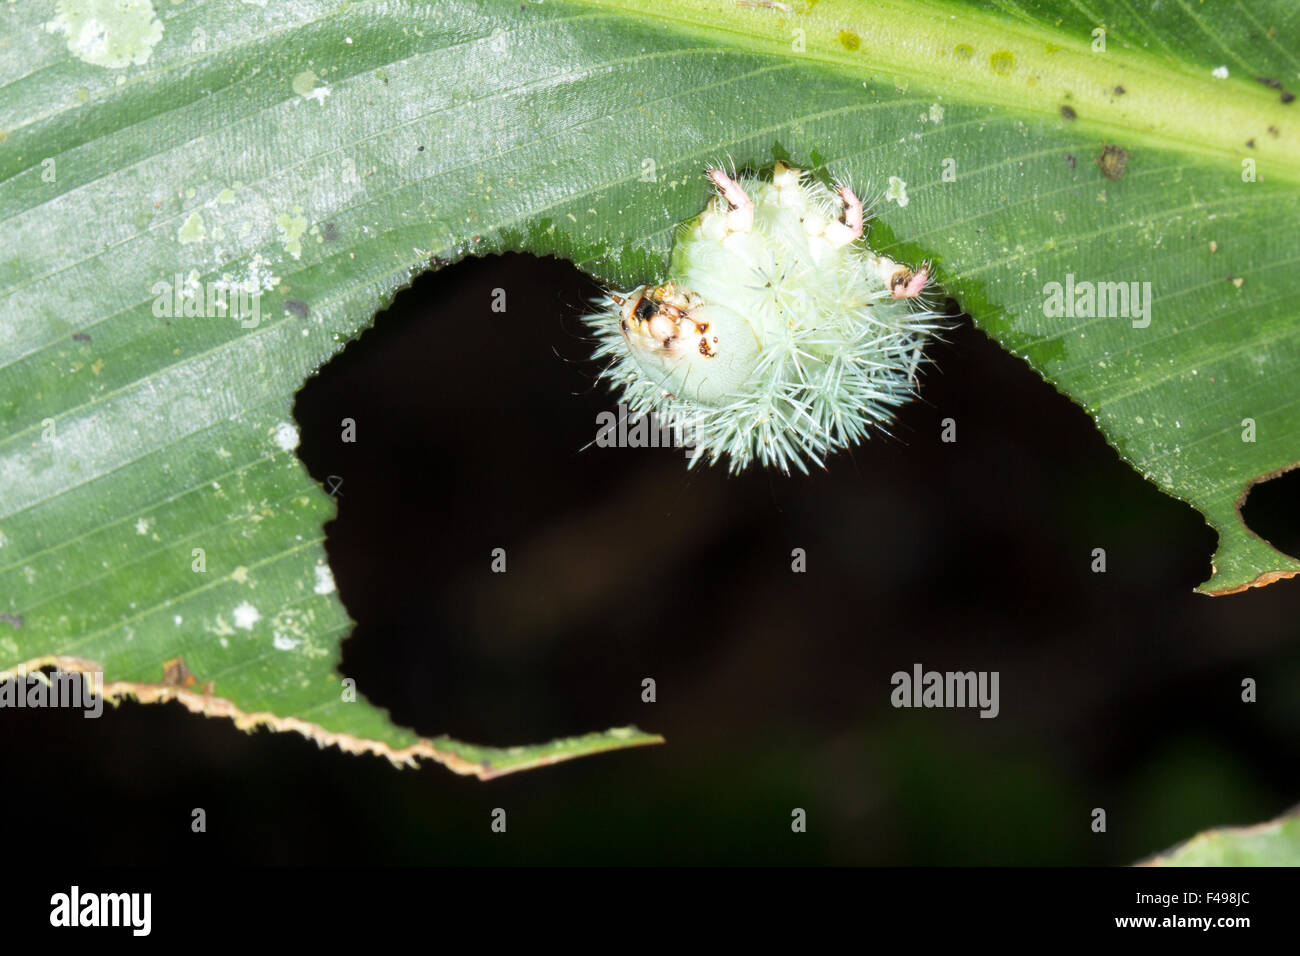 Larva of an Automeris moth (Saturniidae) with poisonous stinging spines, eating a leaf in the rainforest, Ecuador Stock Photo